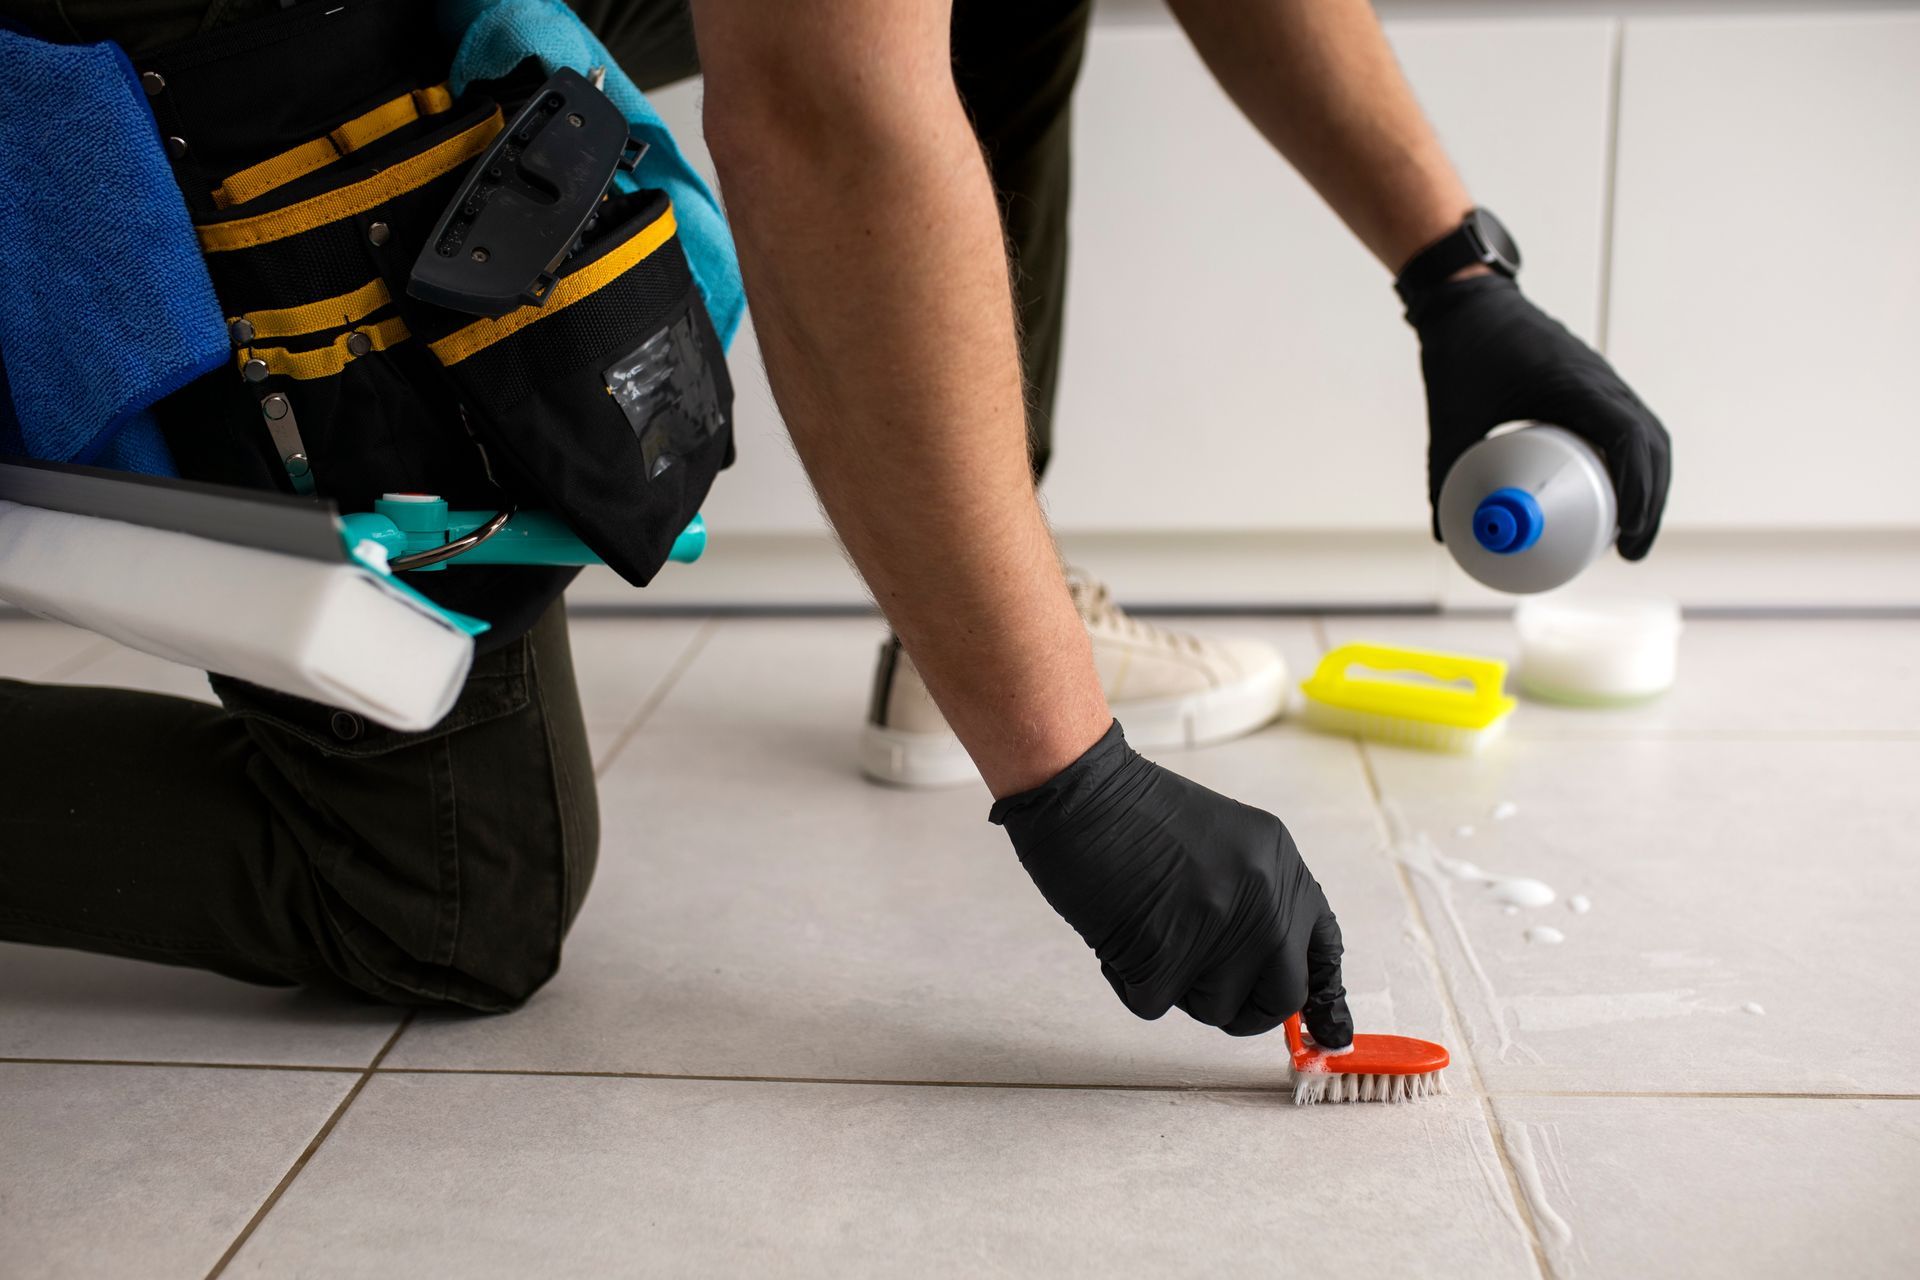 A person is cleaning a tile floor with a brush.